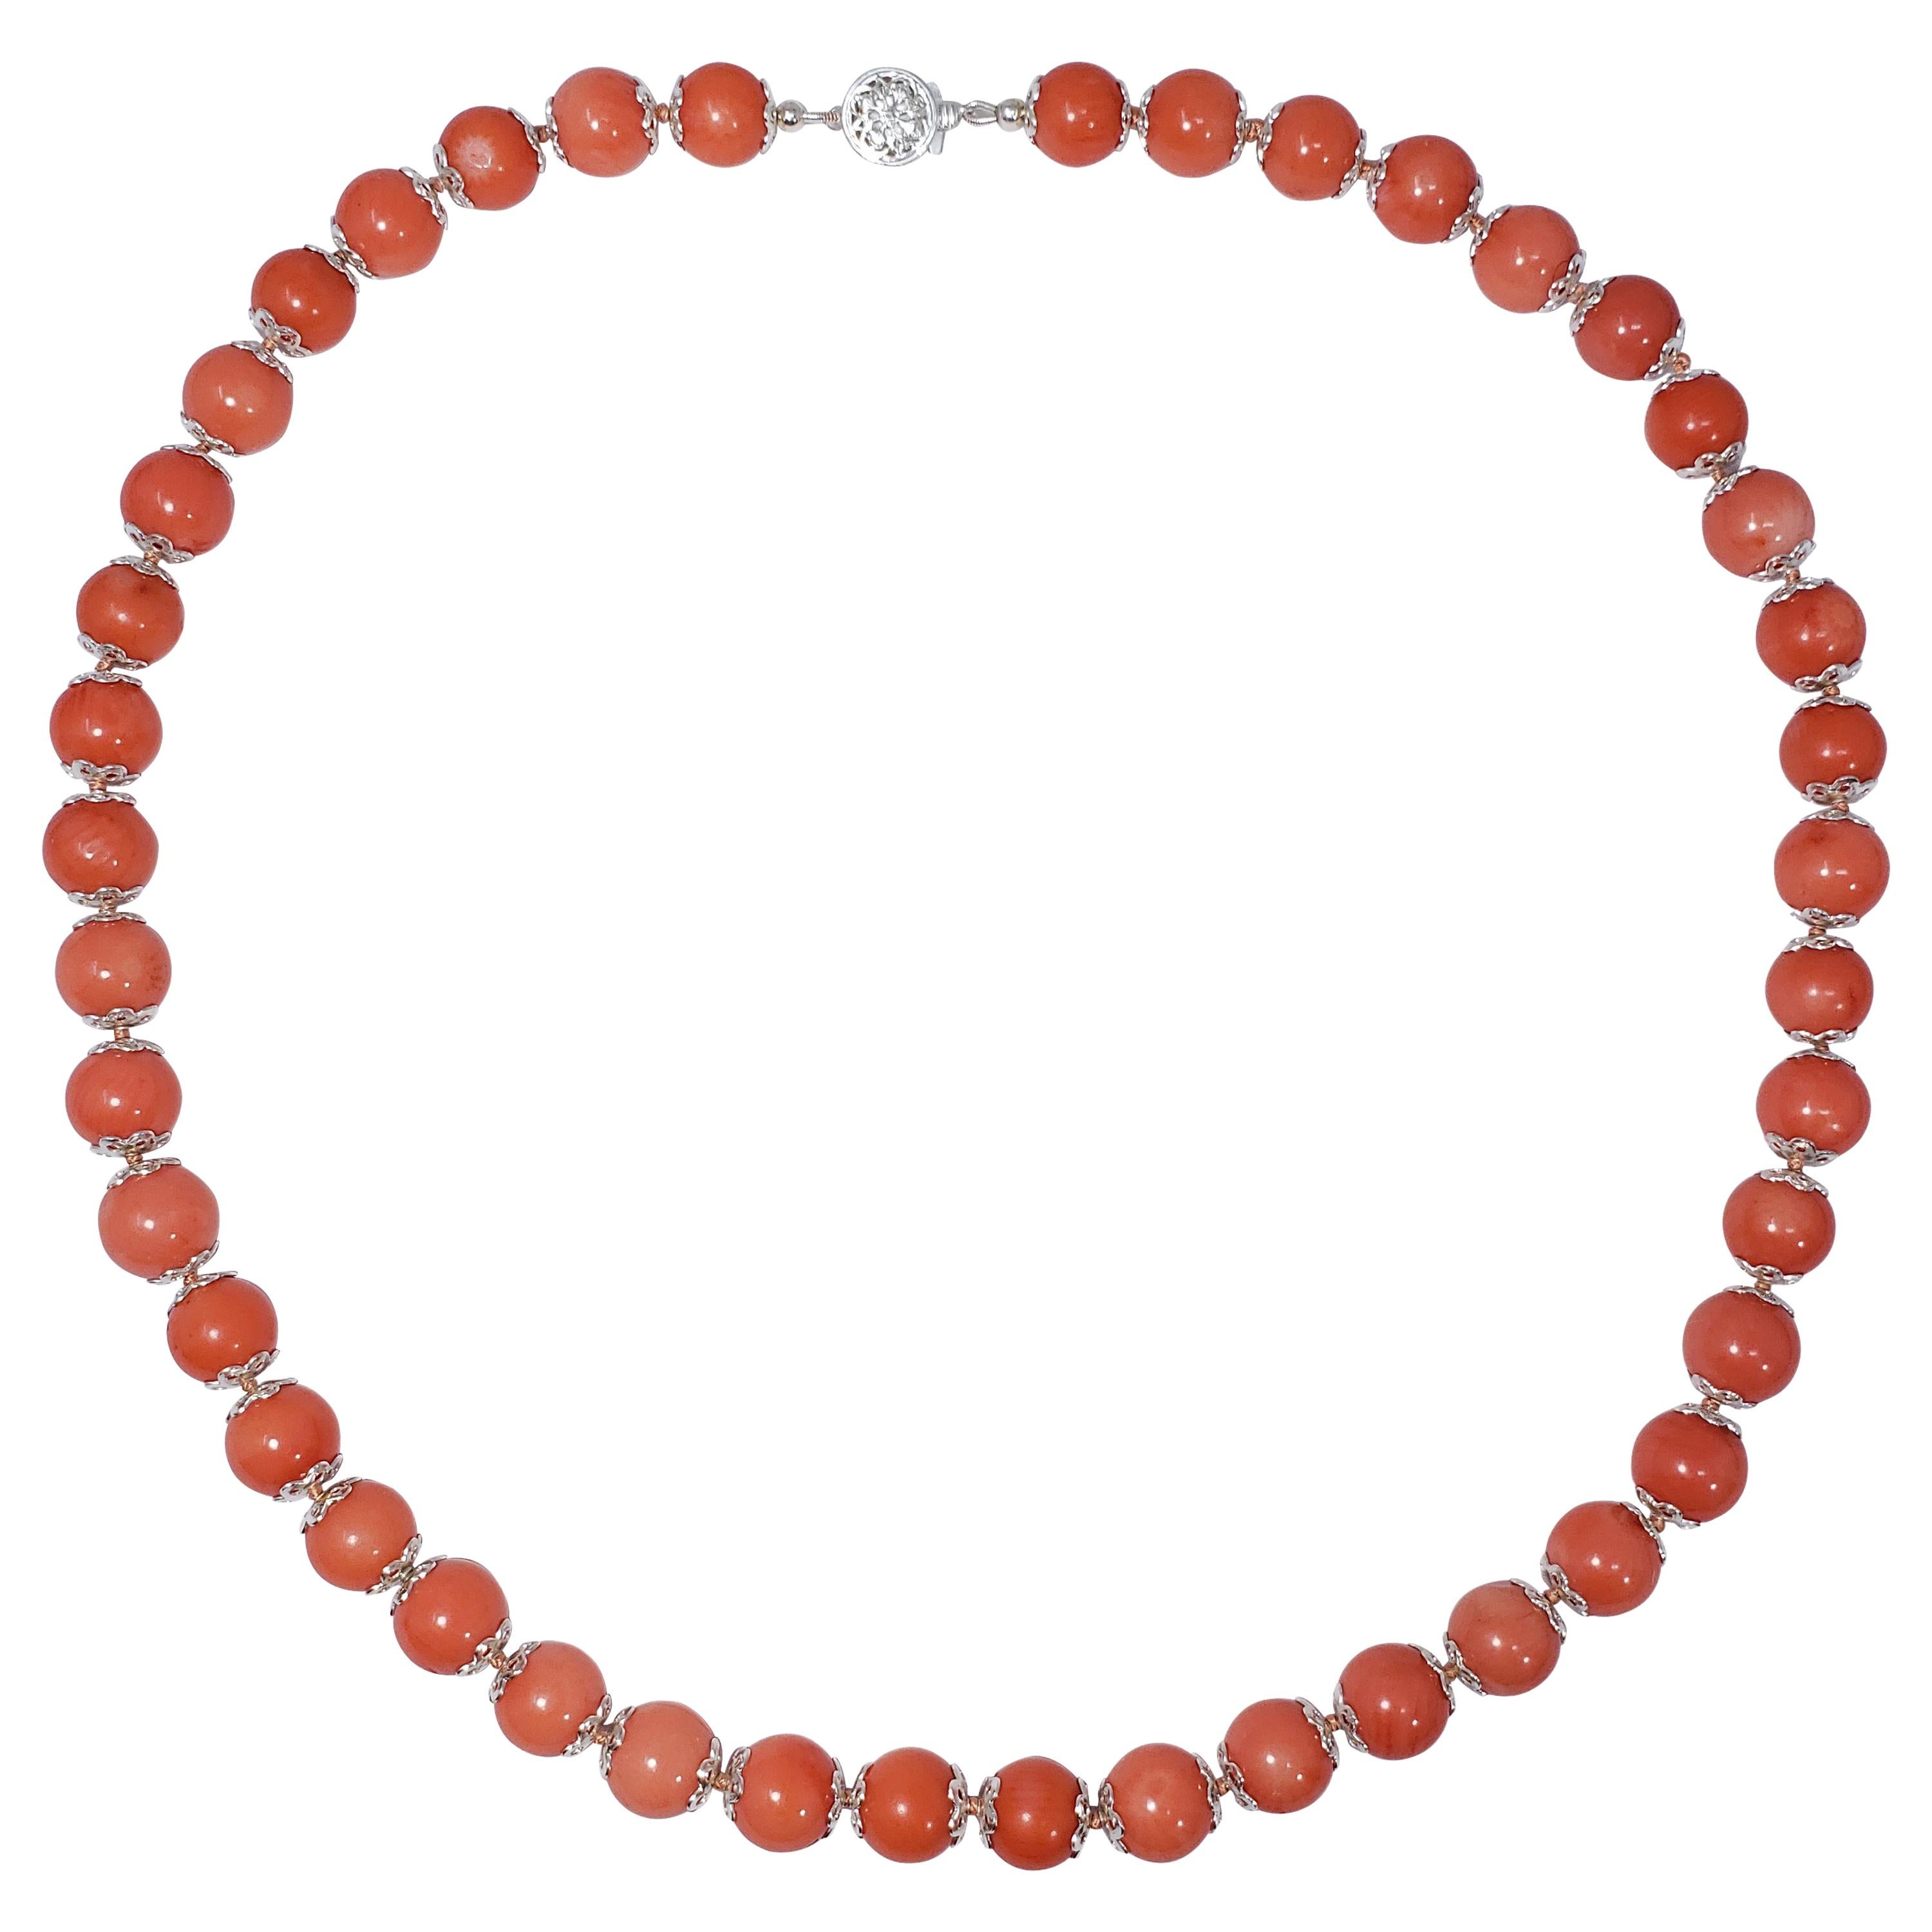 Salmon Coral Bead Knotted String Silver Accent Necklace, 50 cm, Sterling Silver